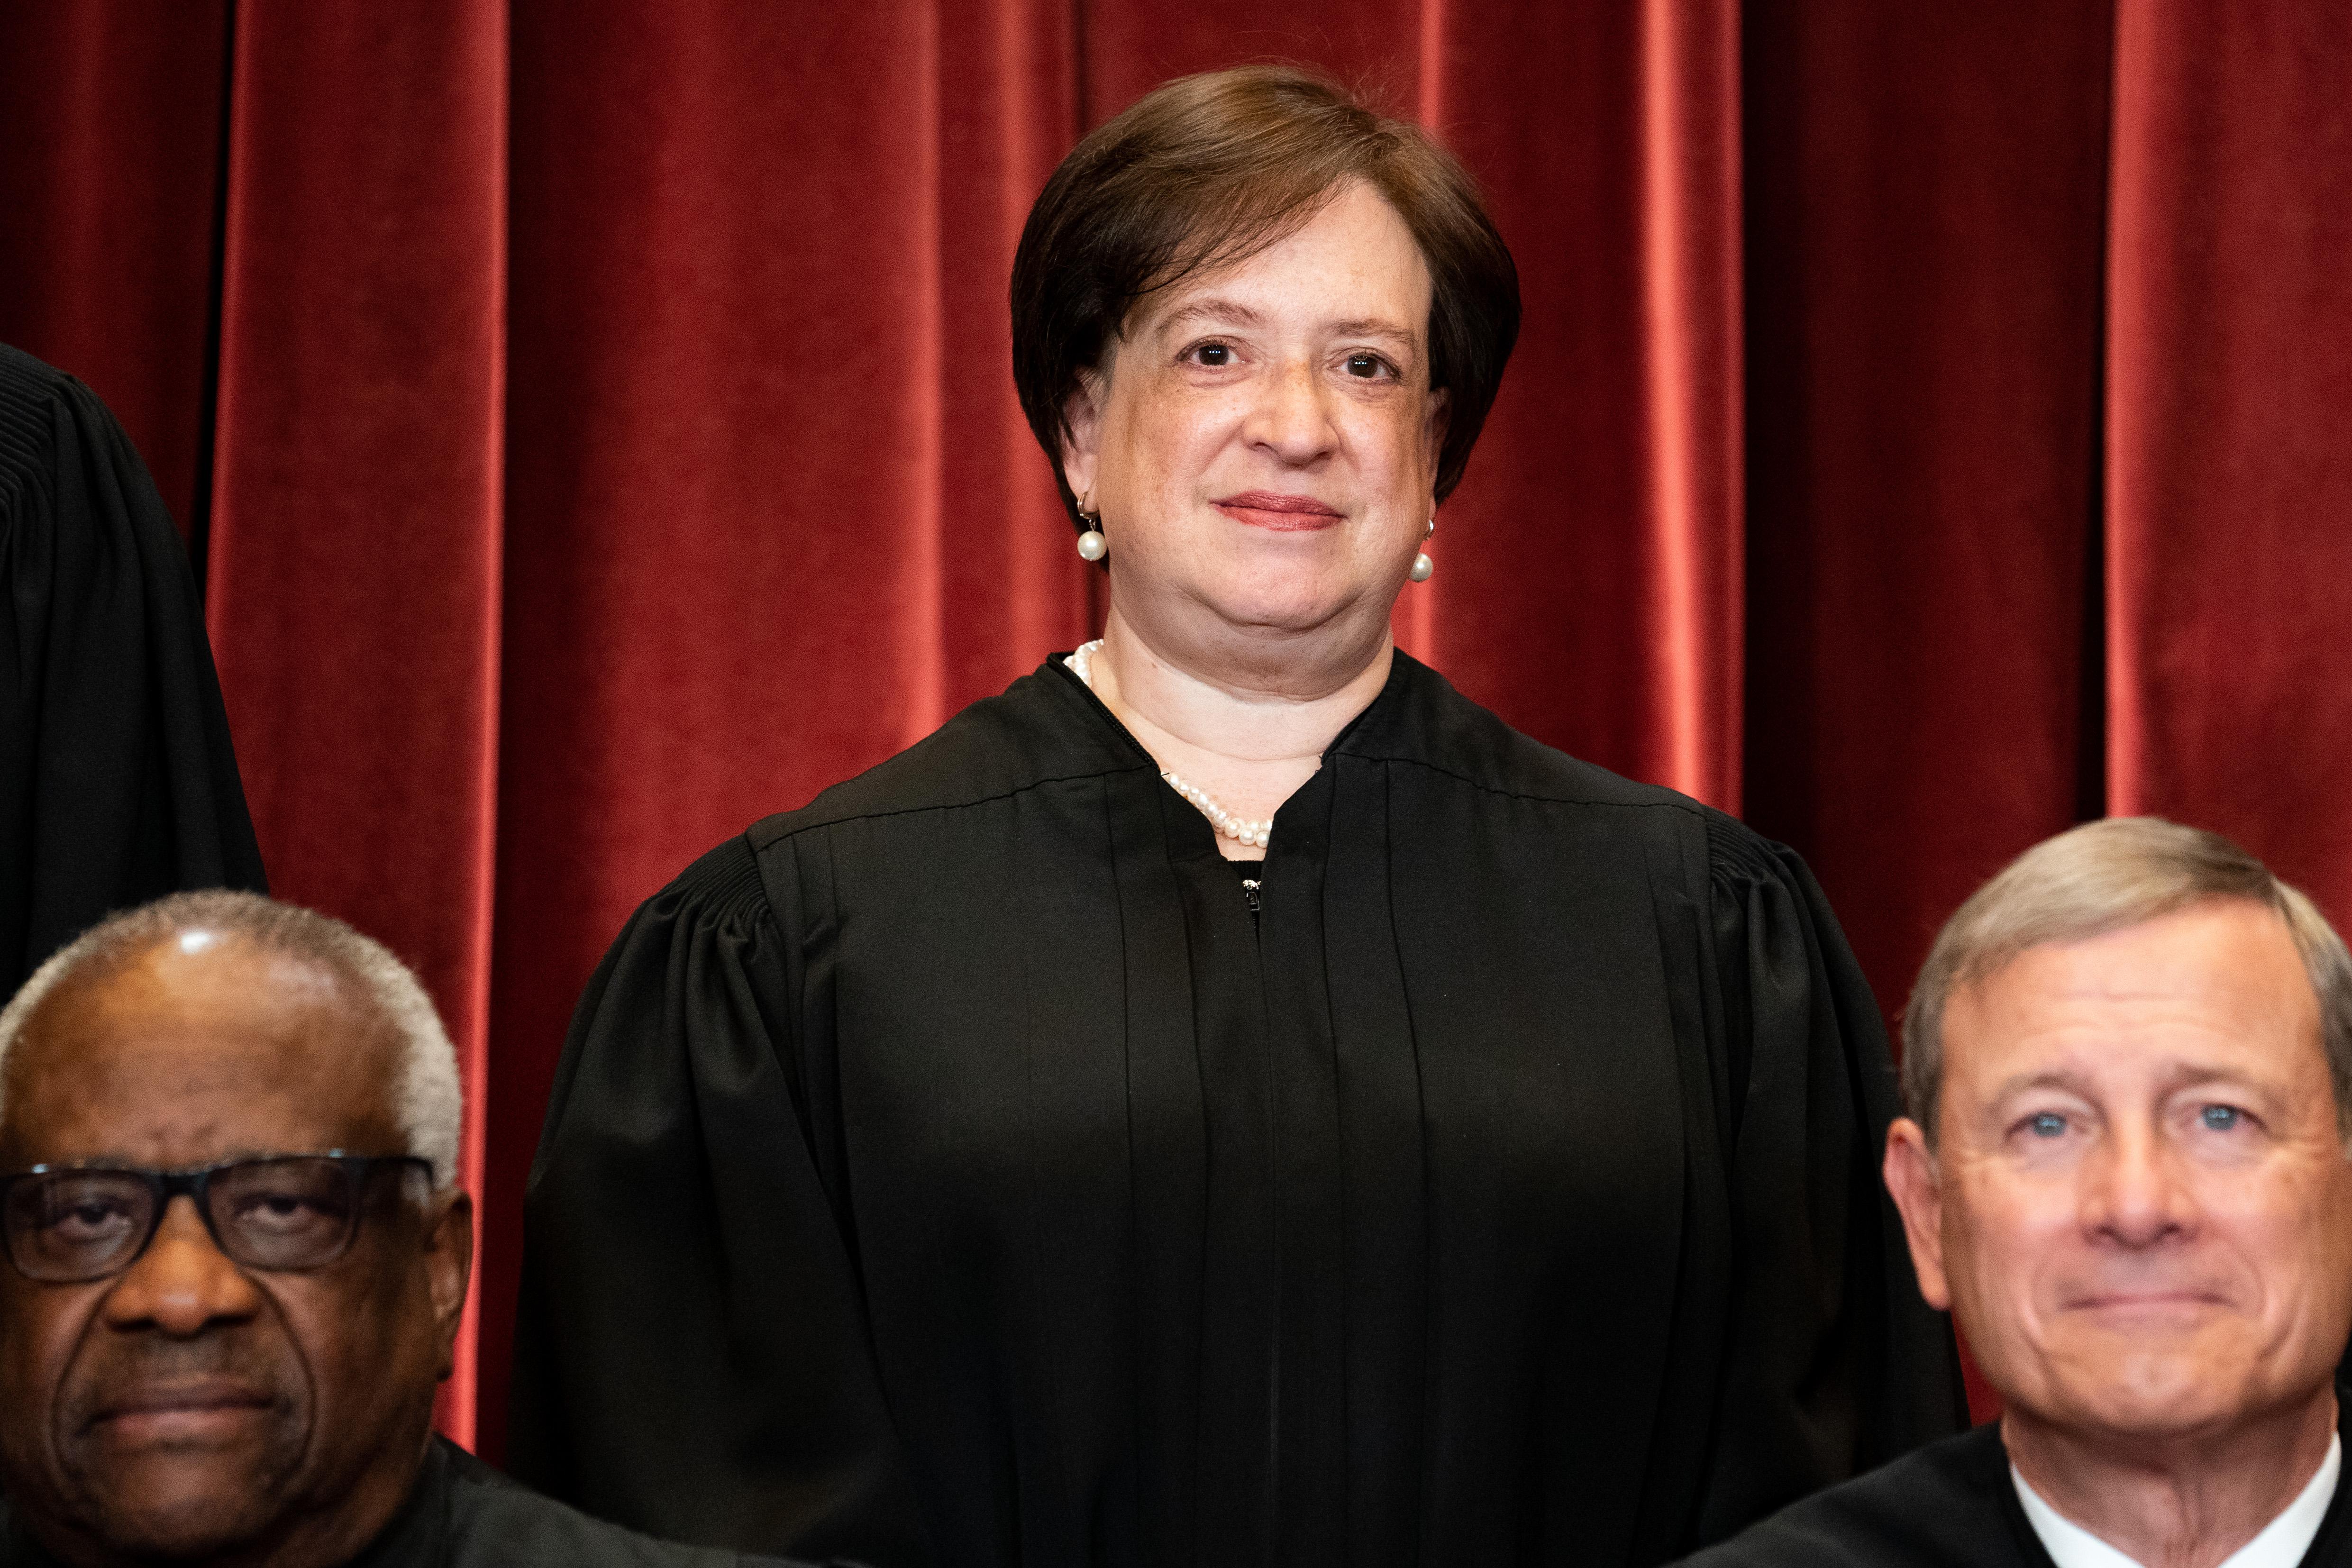 Justice Elena Kagan stands behind Justice Clarence Thomas and Chief Justice John Roberts in a group photo with everyone in their robes in front of a red curtain